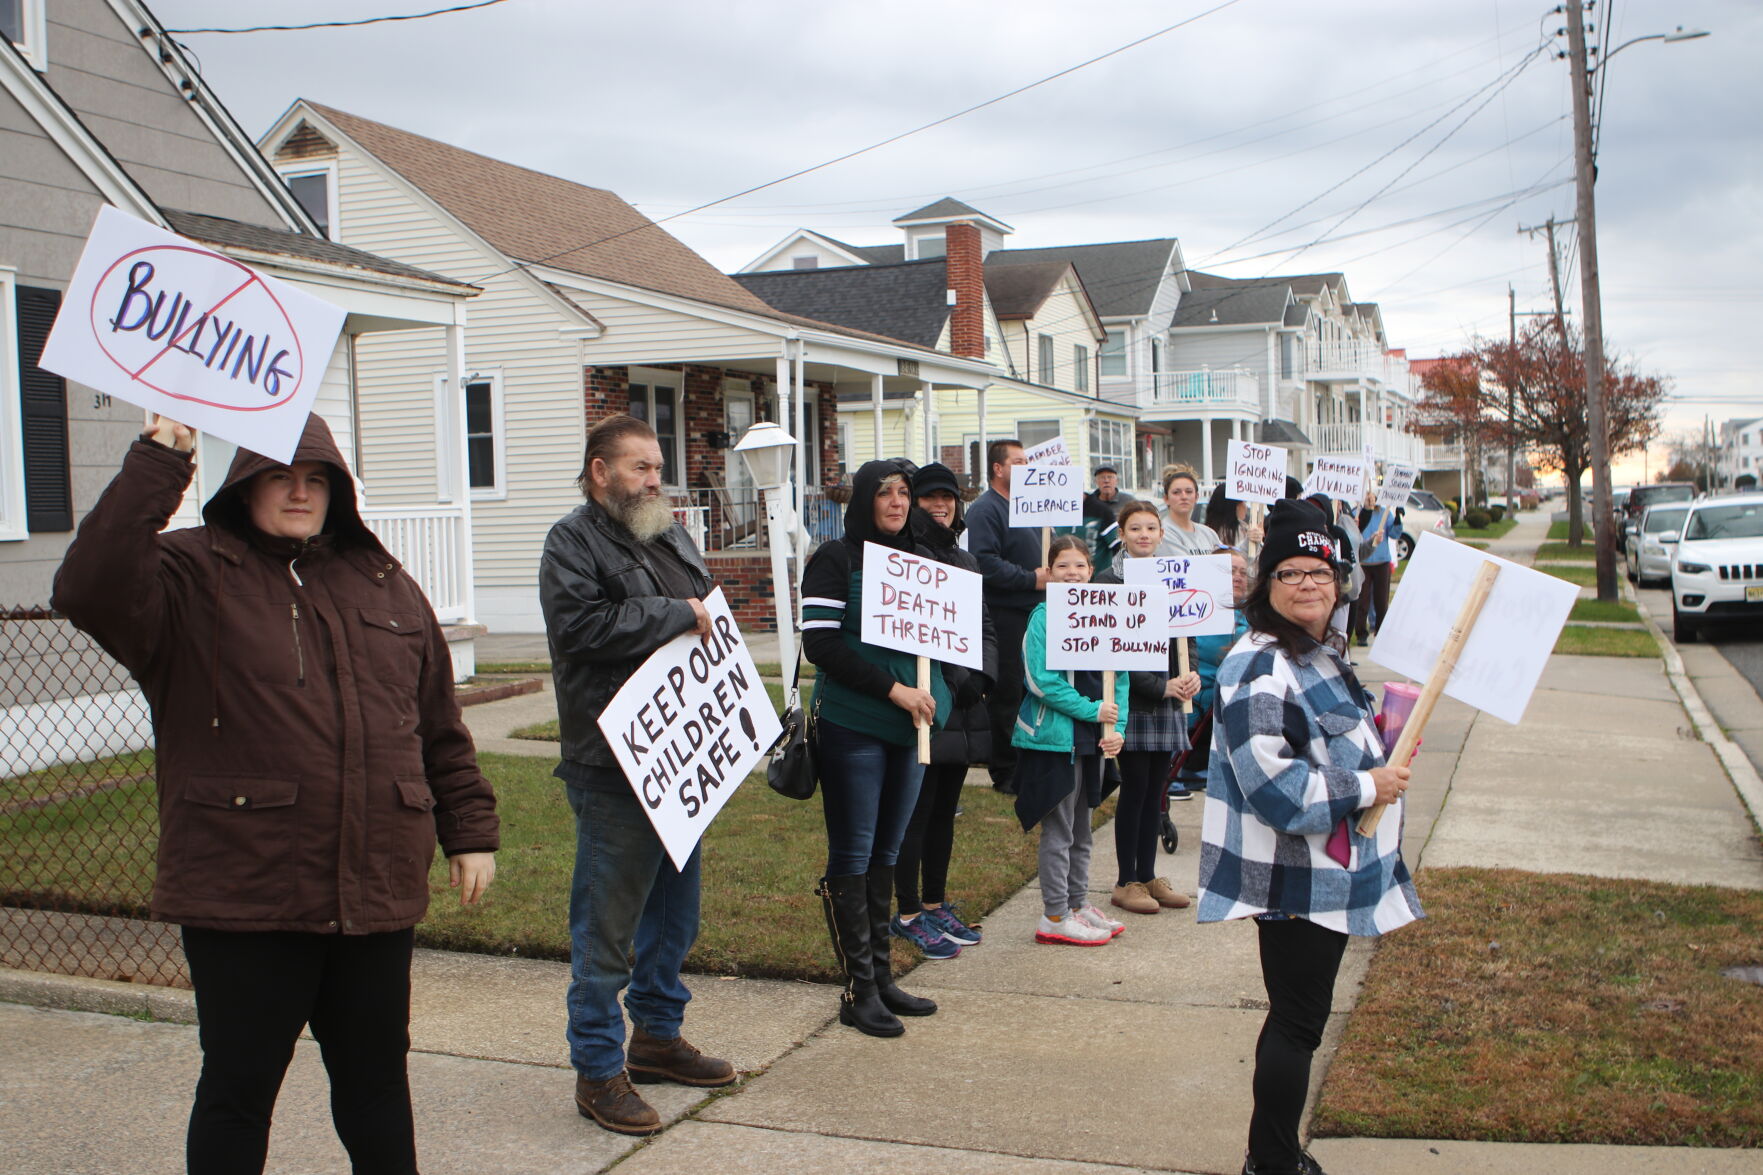 Parents protest bullying at North Wildwood school